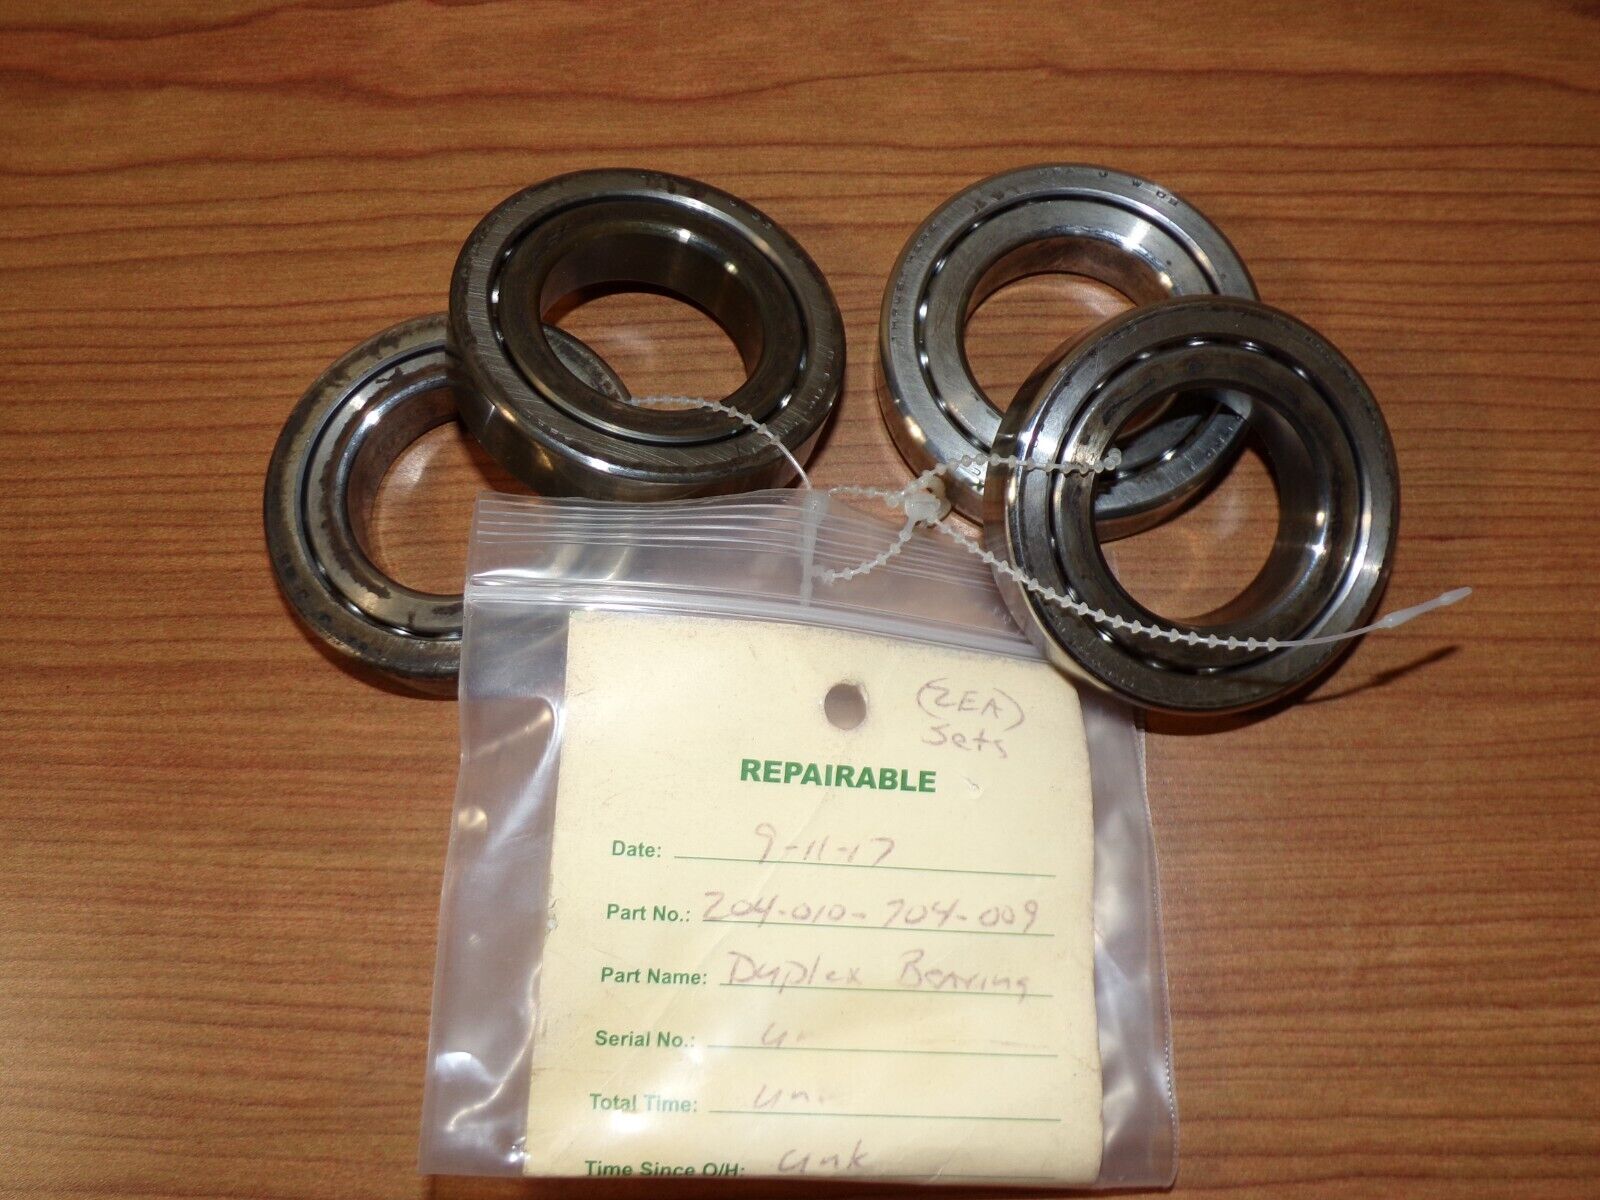 Bell 204 Helicopter Bearings 204-010-704-009